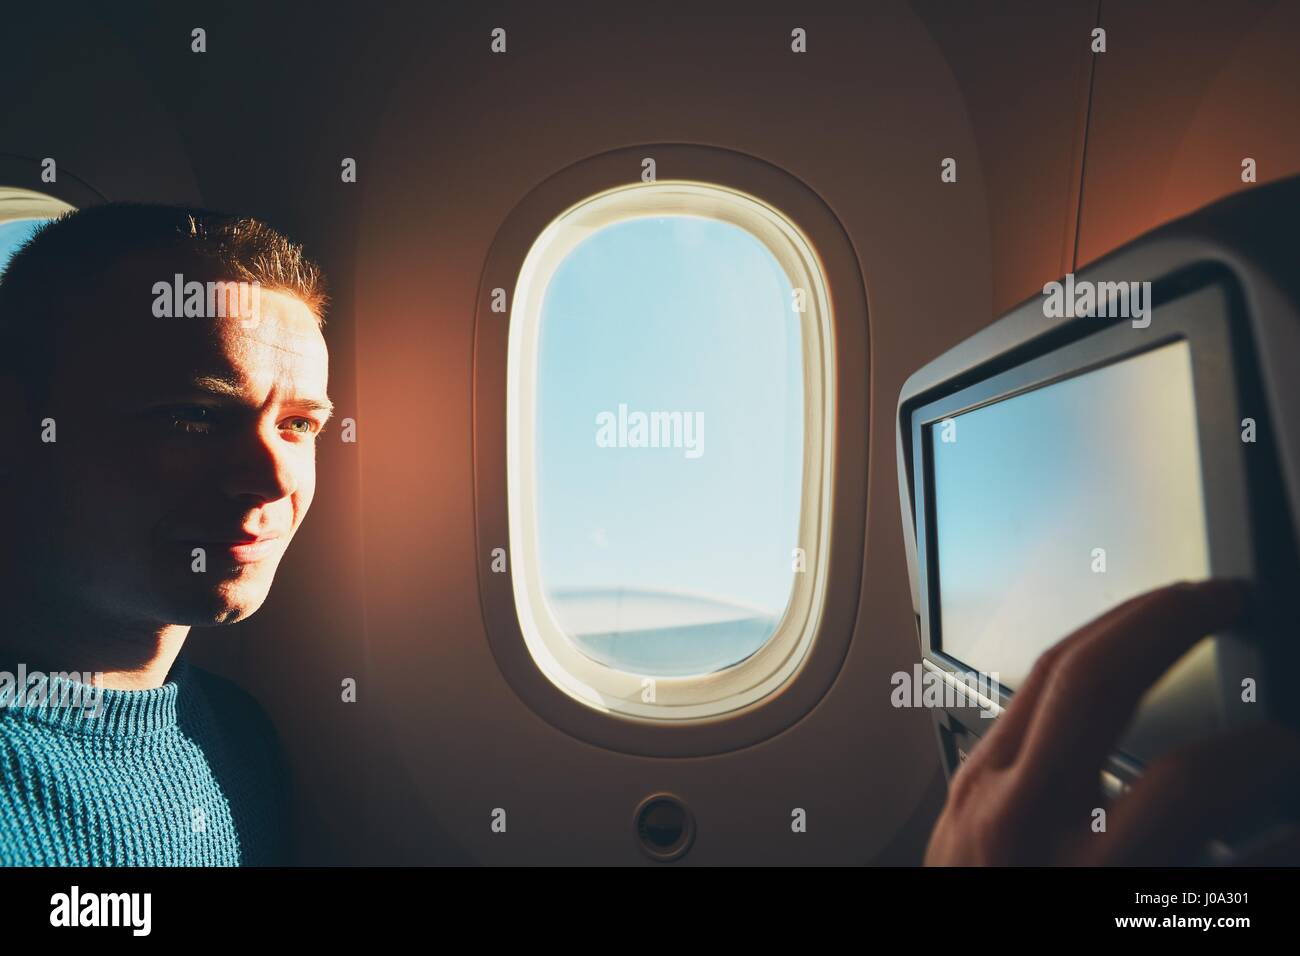 Comfortable traveling by airplane. Young passenger enjoying his journey inside an airplane. Stock Photo